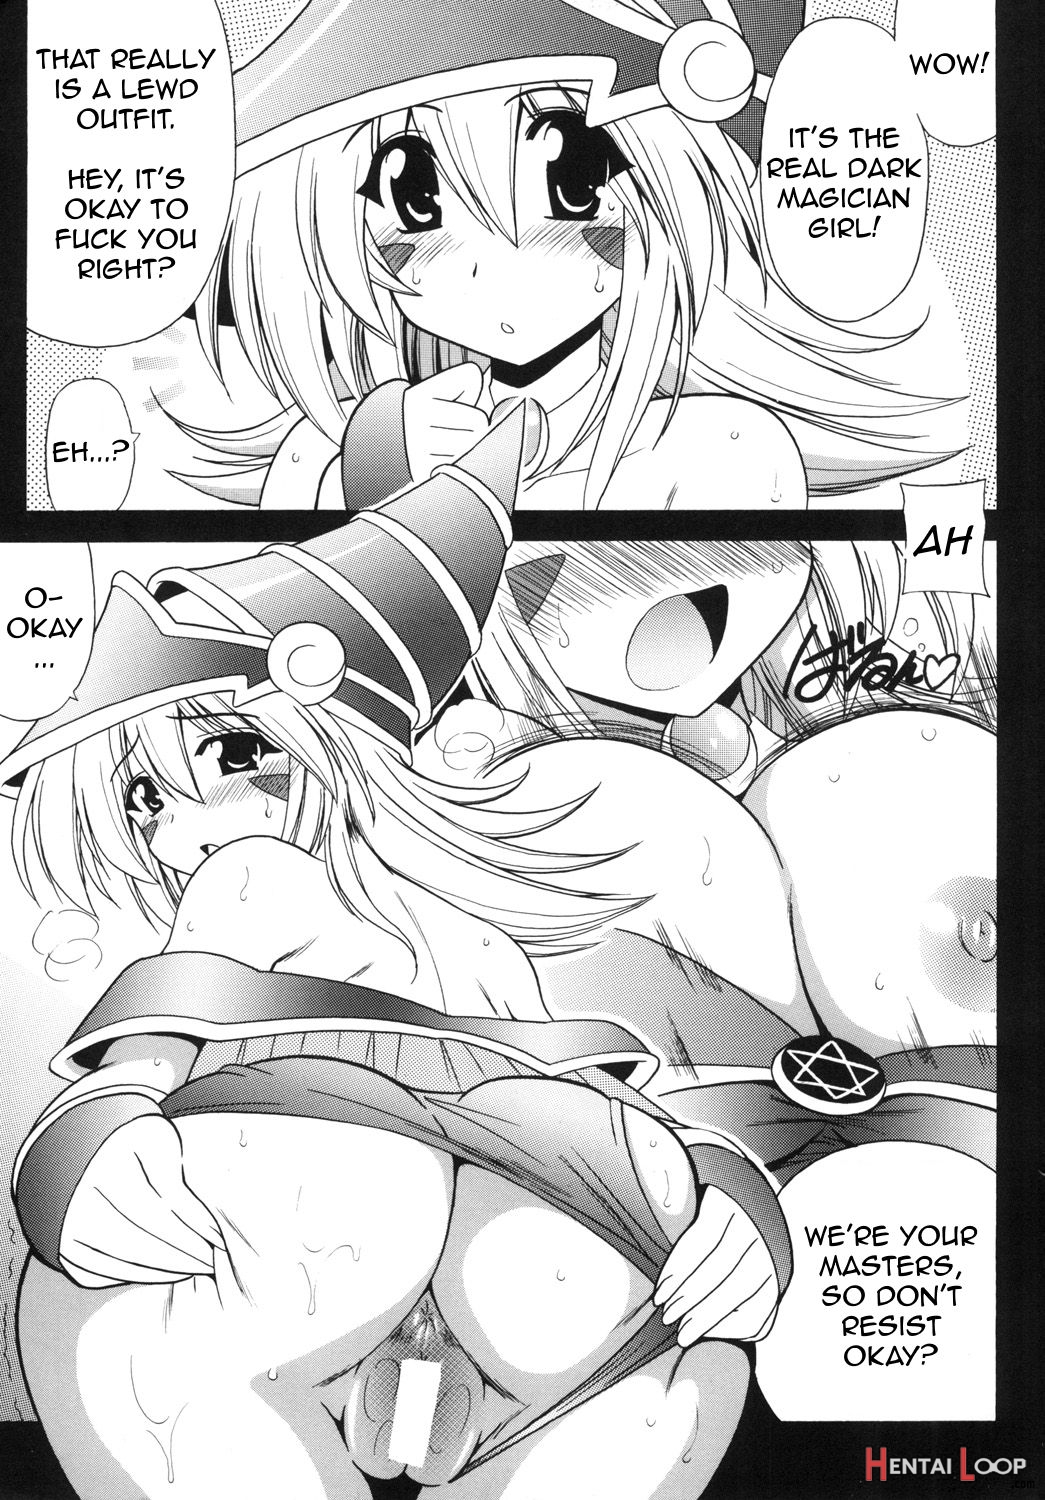 Let's Have Sex With Dark Magician Girl ♡ page 3